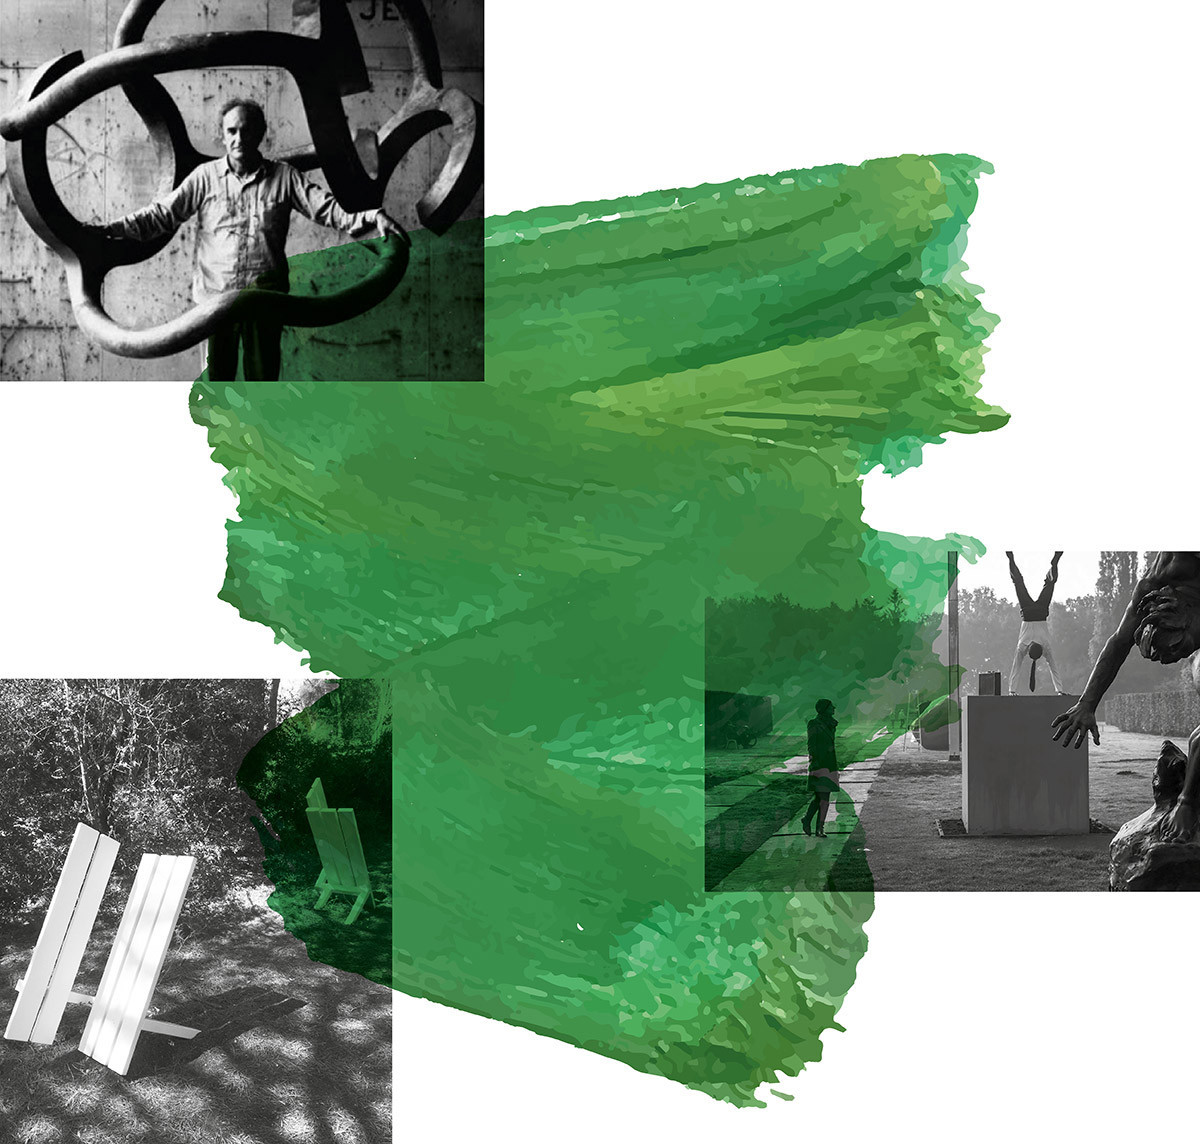 Collage of black and white photographs with green paint in the center.